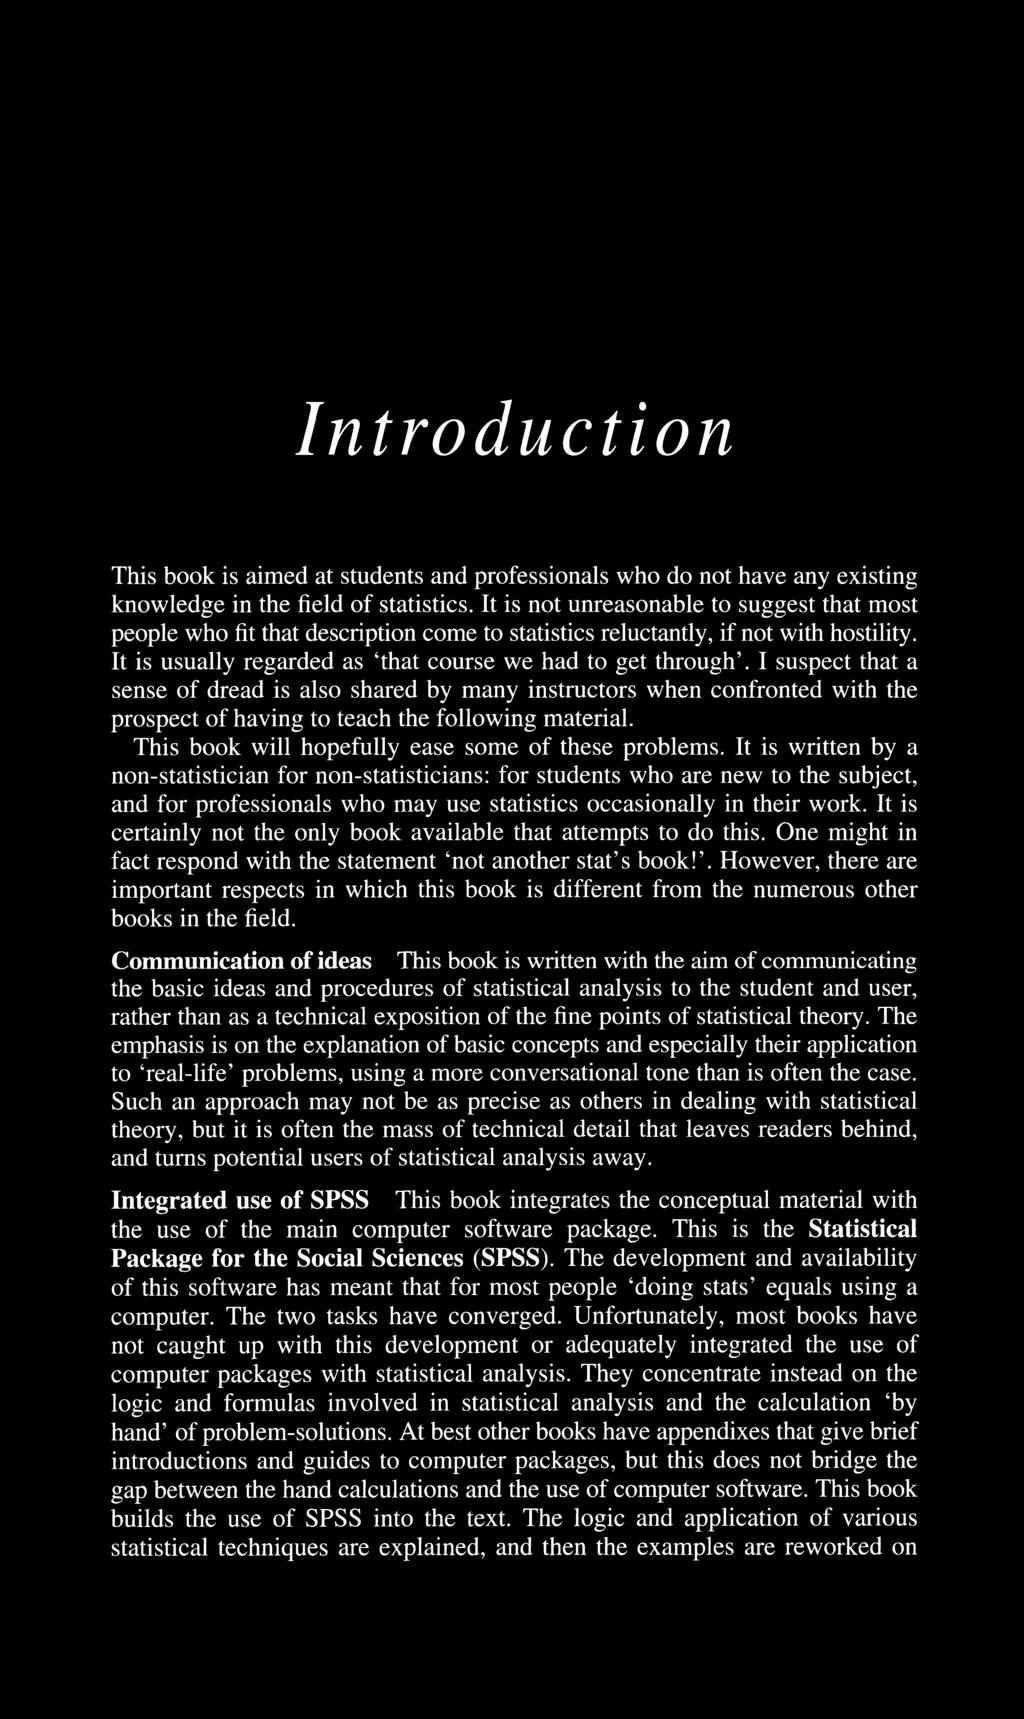 Introduction This book is aimed at students and professionals who do not have any existing knowledge in the field of statistics.